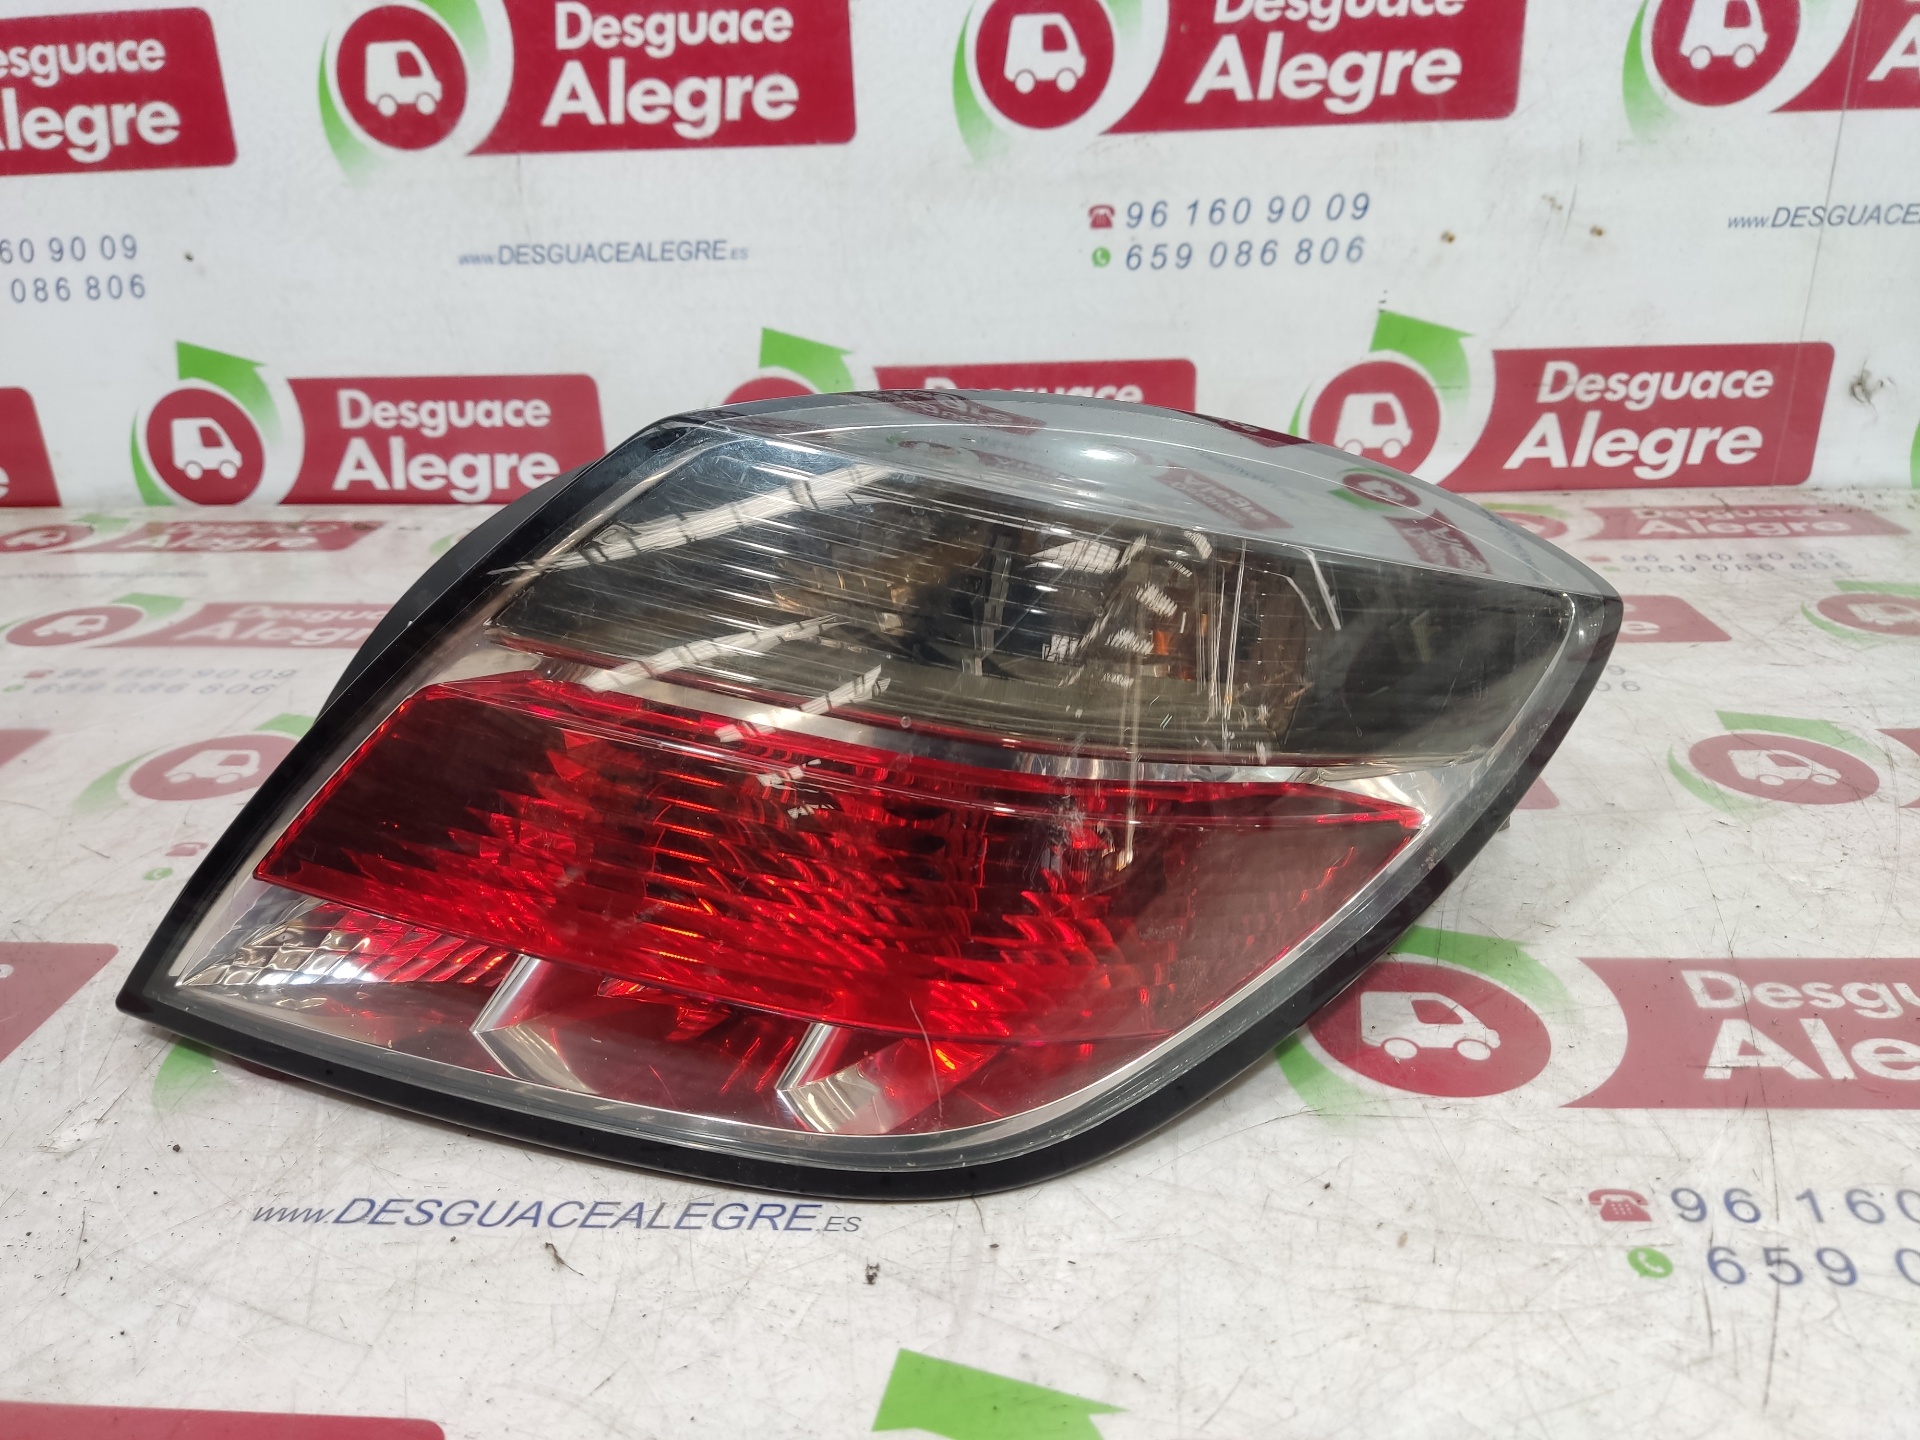 OPEL Astra H (2004-2014) Rear Right Taillight Lamp 24451834 24858806